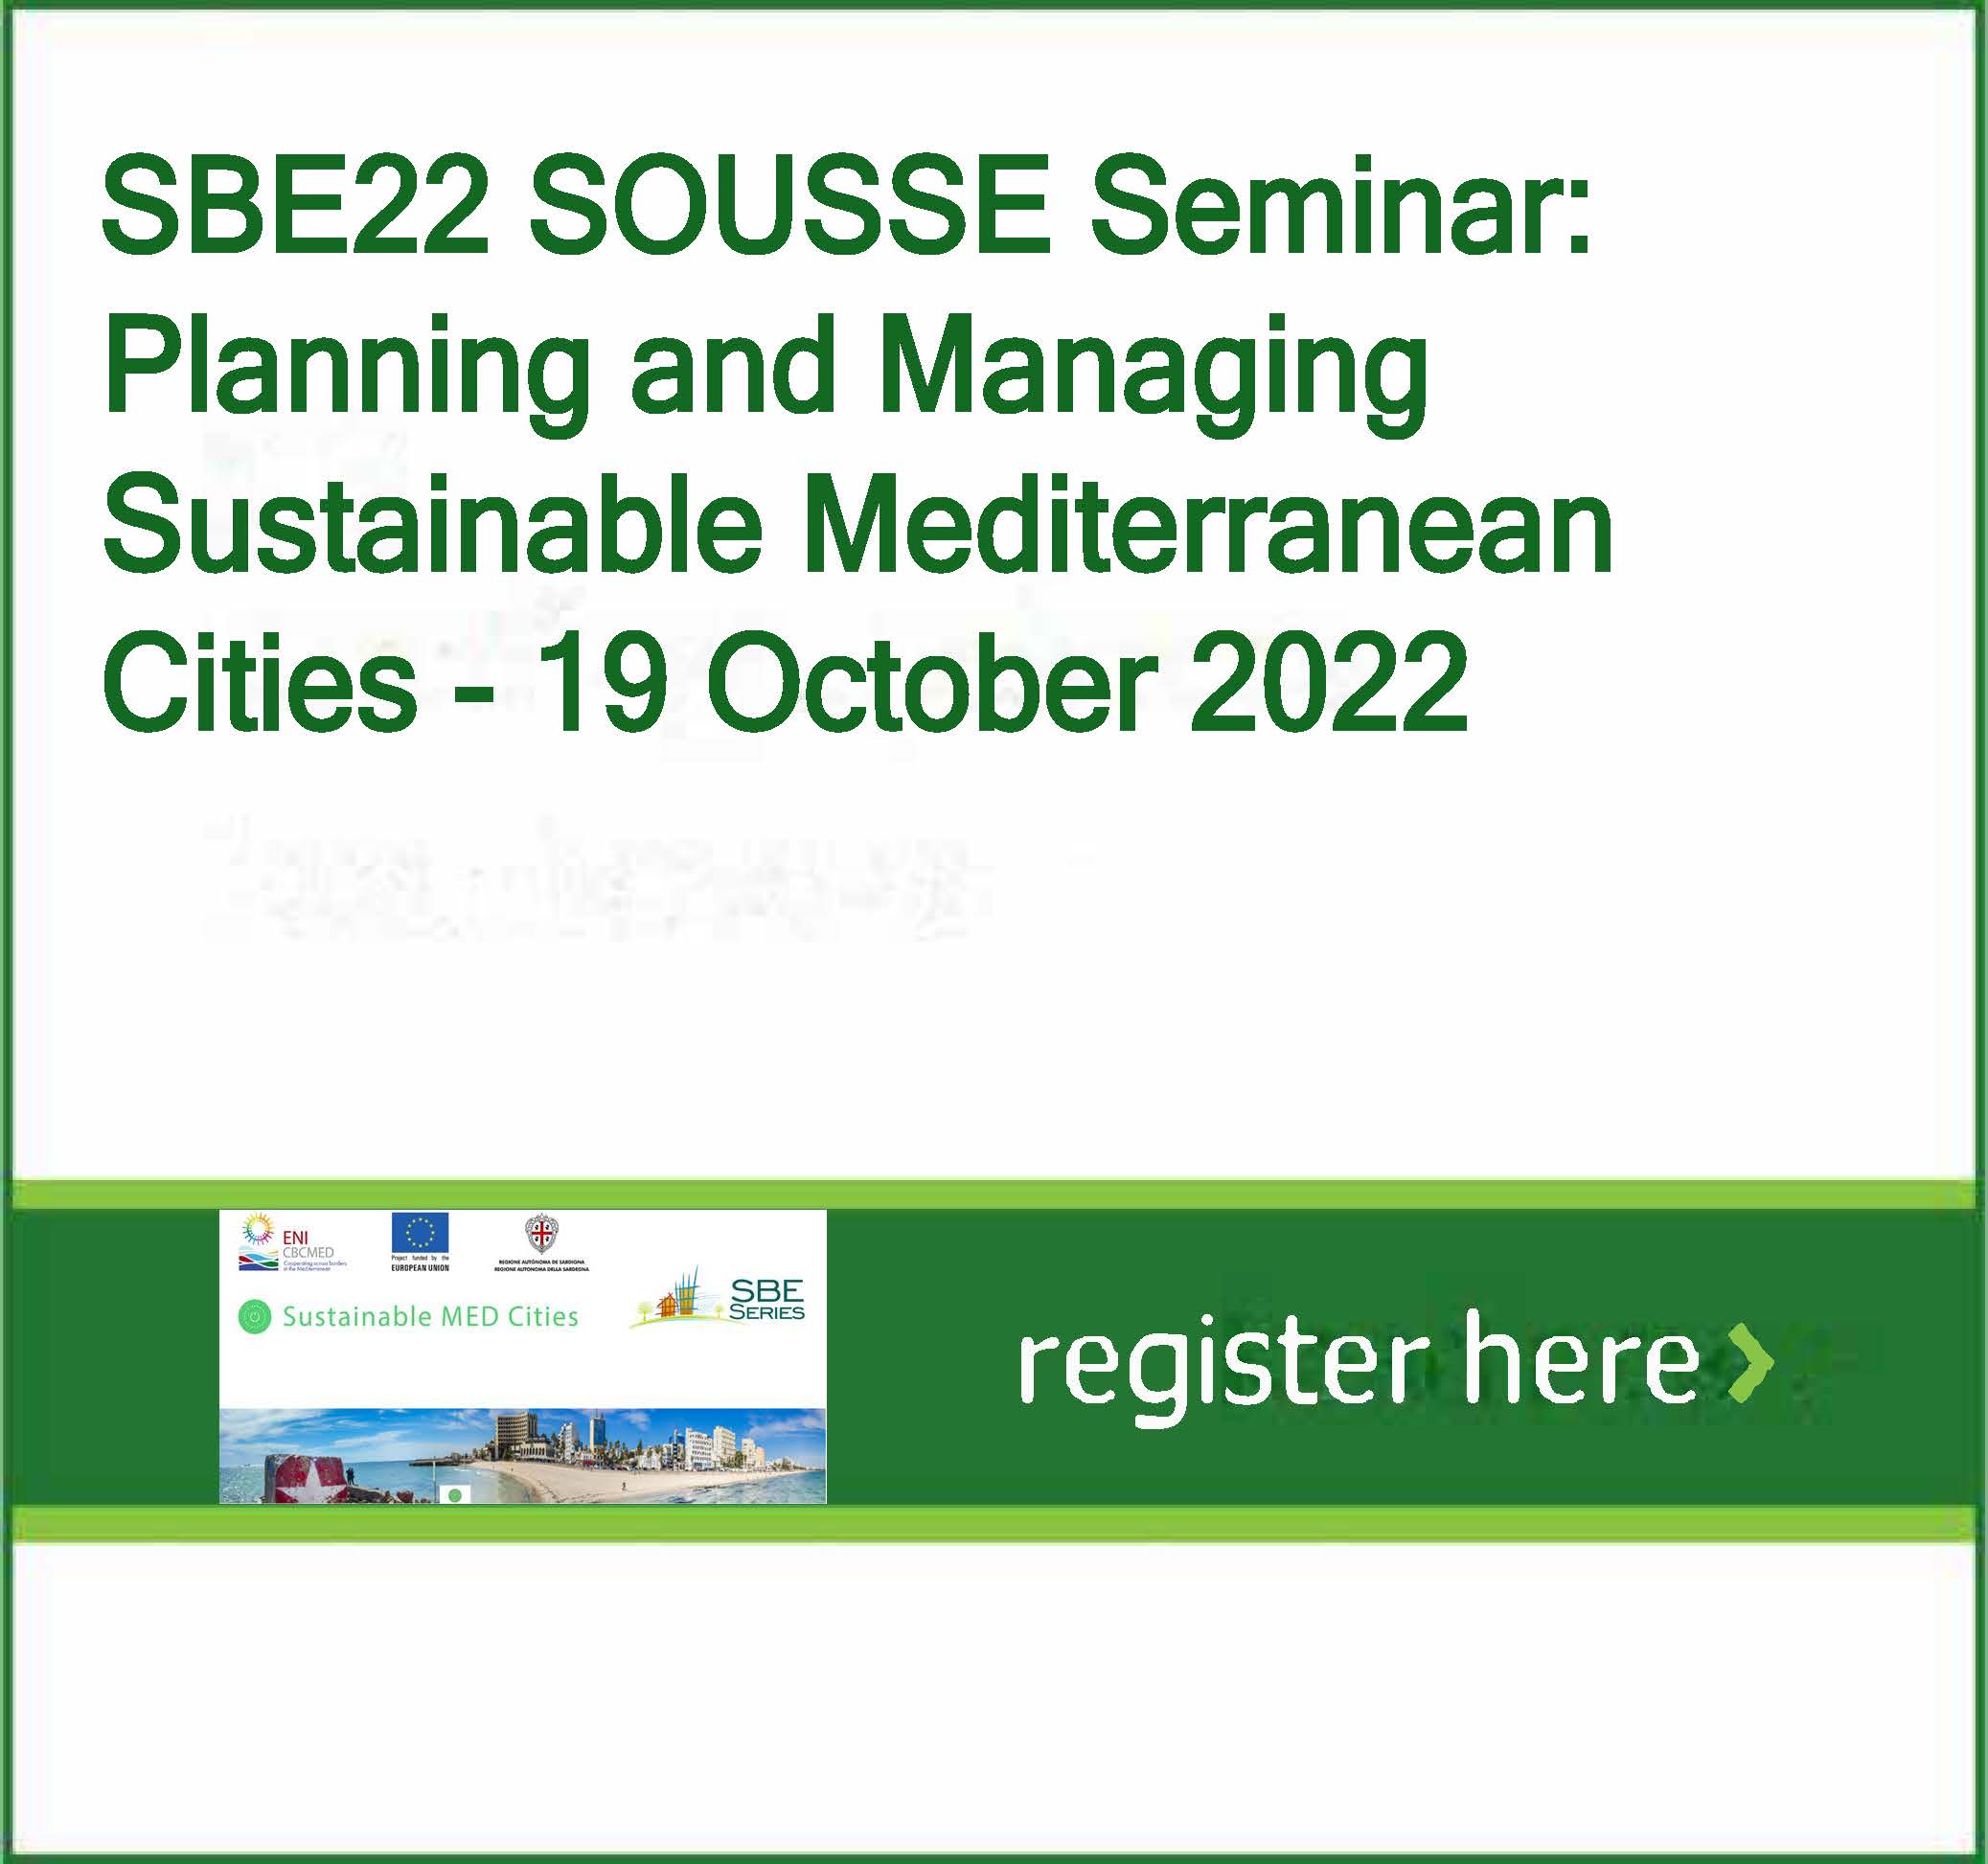 SBE22 SOUSSE Seminar: Planning and Managing Sustainable Mediterranean Cities – 19 October 2022